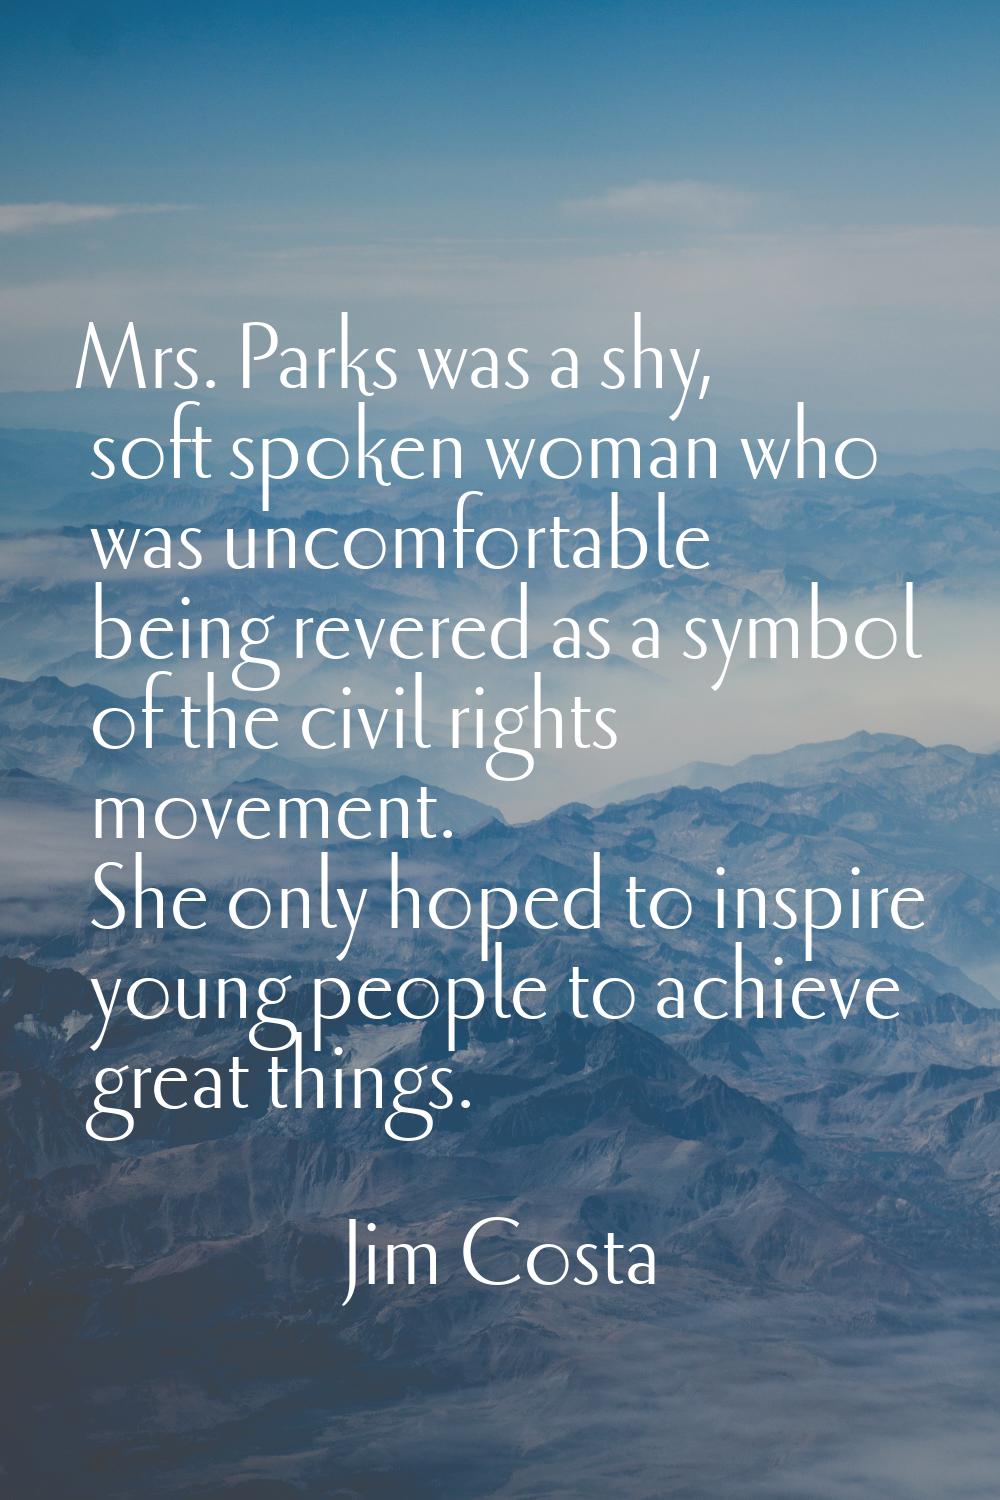 Mrs. Parks was a shy, soft spoken woman who was uncomfortable being revered as a symbol of the civi